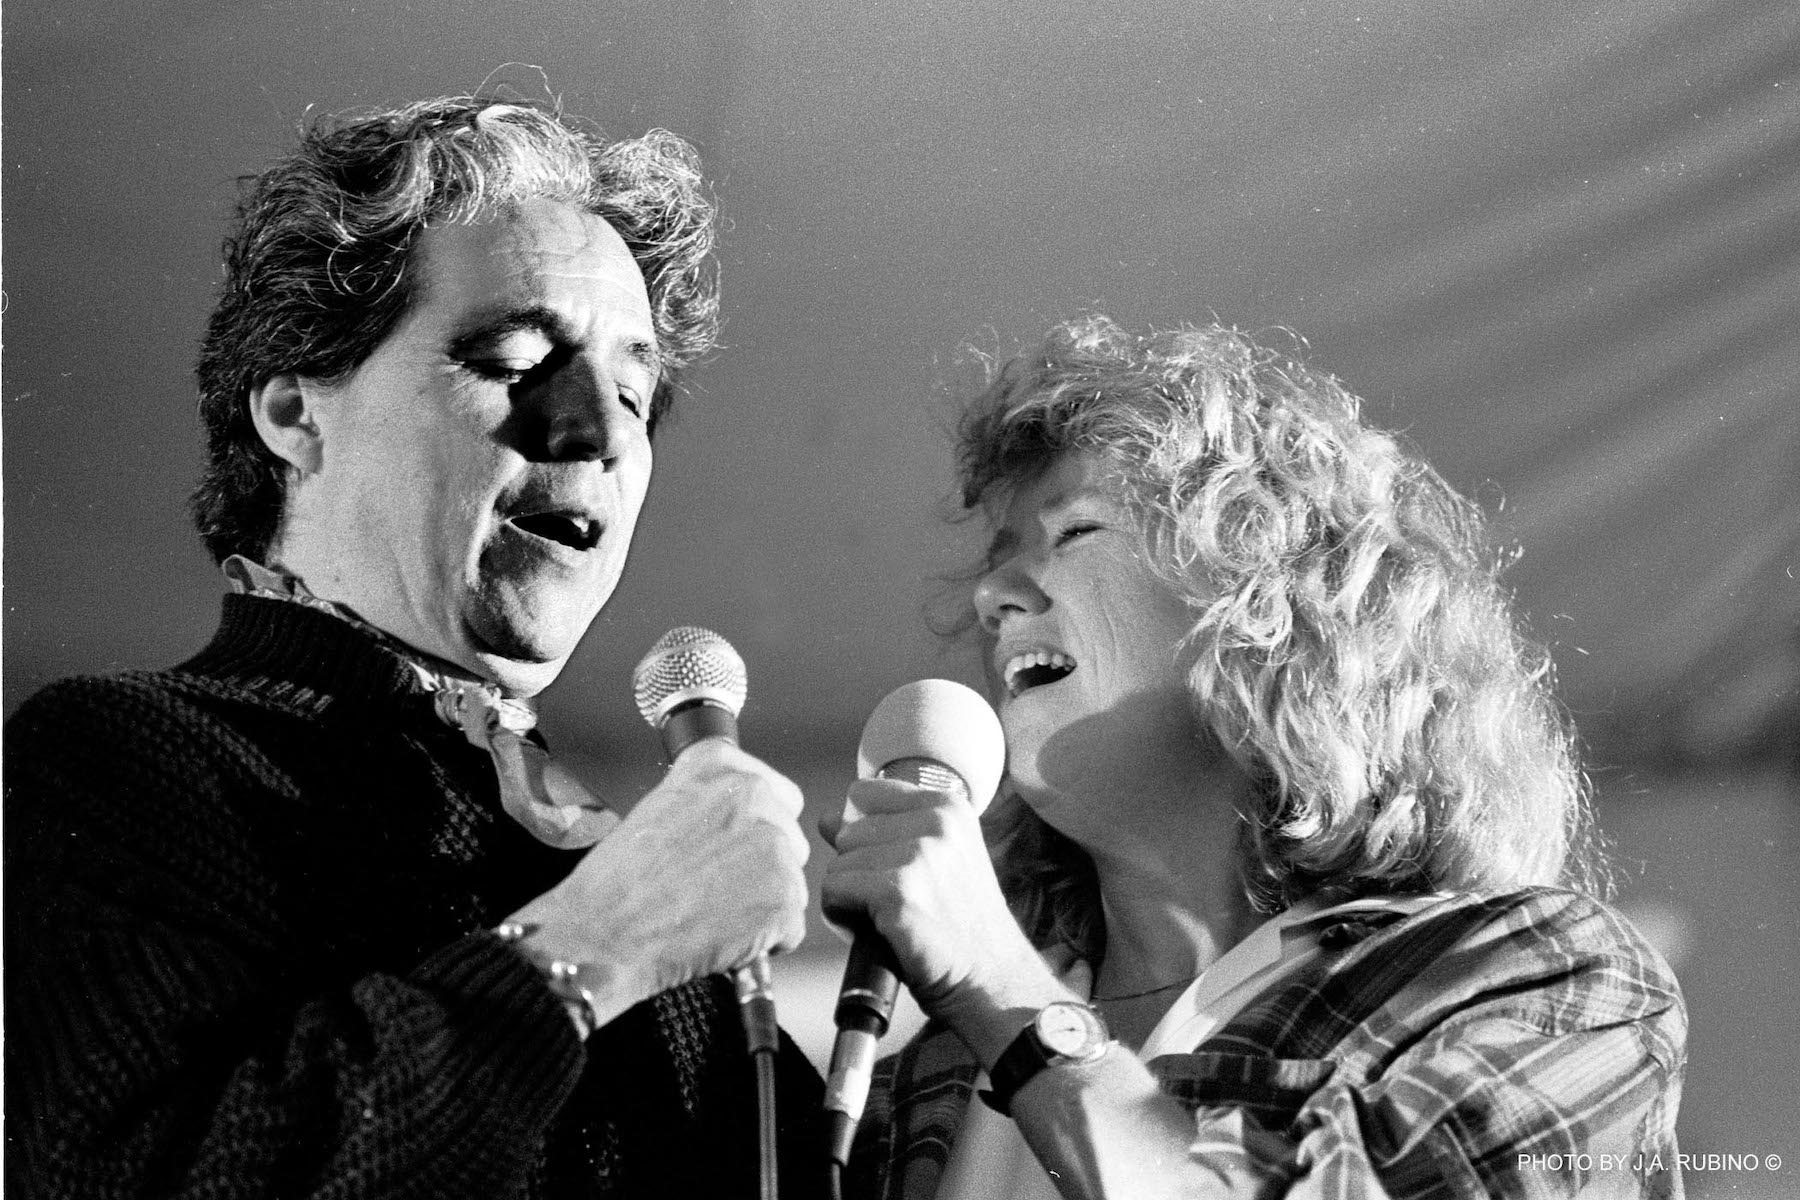 Holly Near and Luis Enrigue Mejia Godoy de Nicaragua performing at the Redwood Music Festival, 1989. Photo Credit: J.A. Rubino. Photo courtesy of Holly Near.